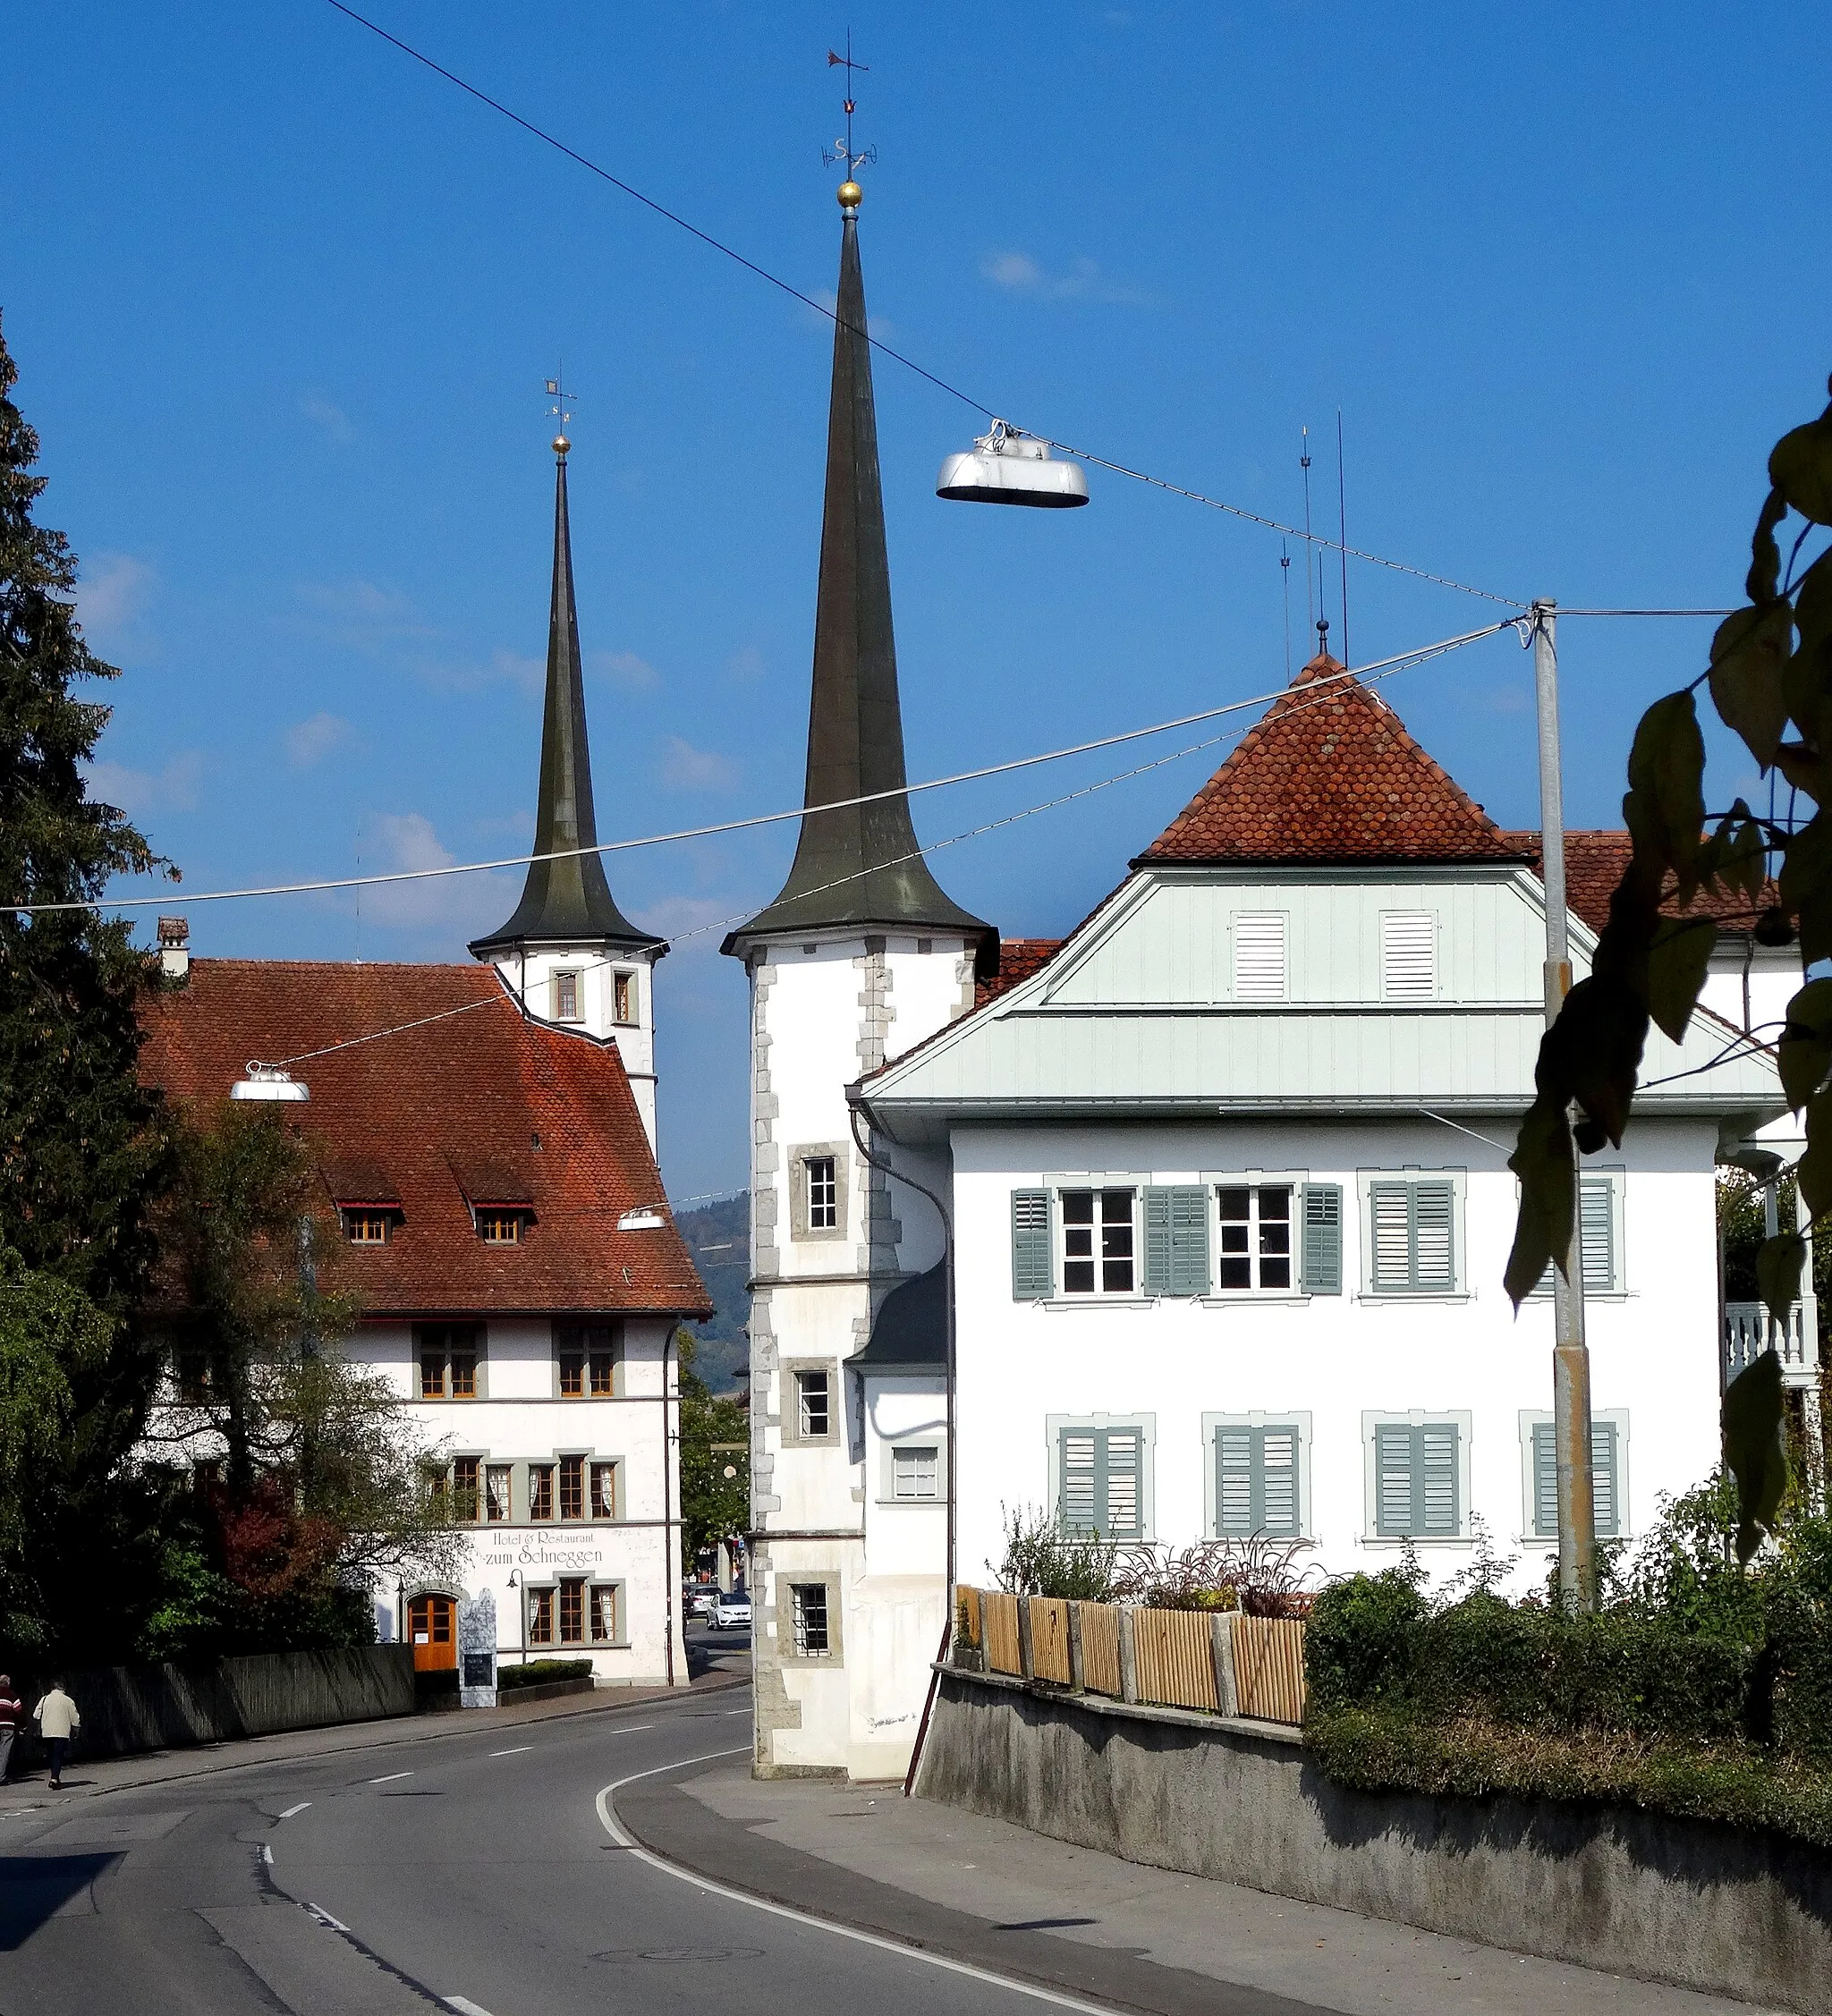 Photo showing: The two "Schneggen" buildings in Reinach AG, Switzerland.